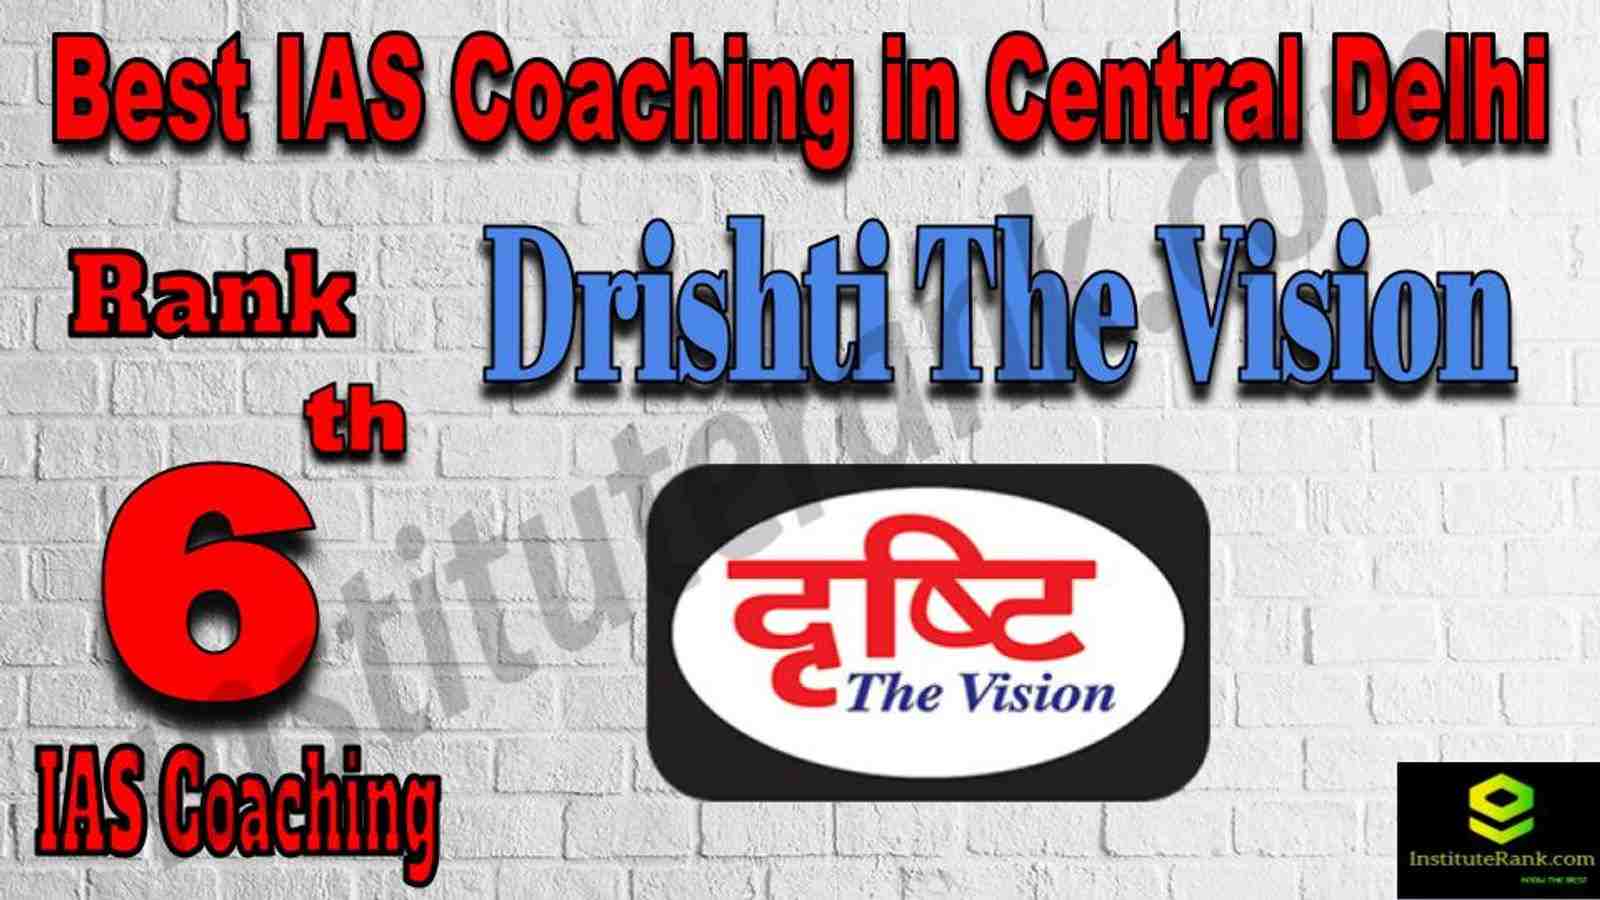 6th Best IAS Coaching in Central Delhi